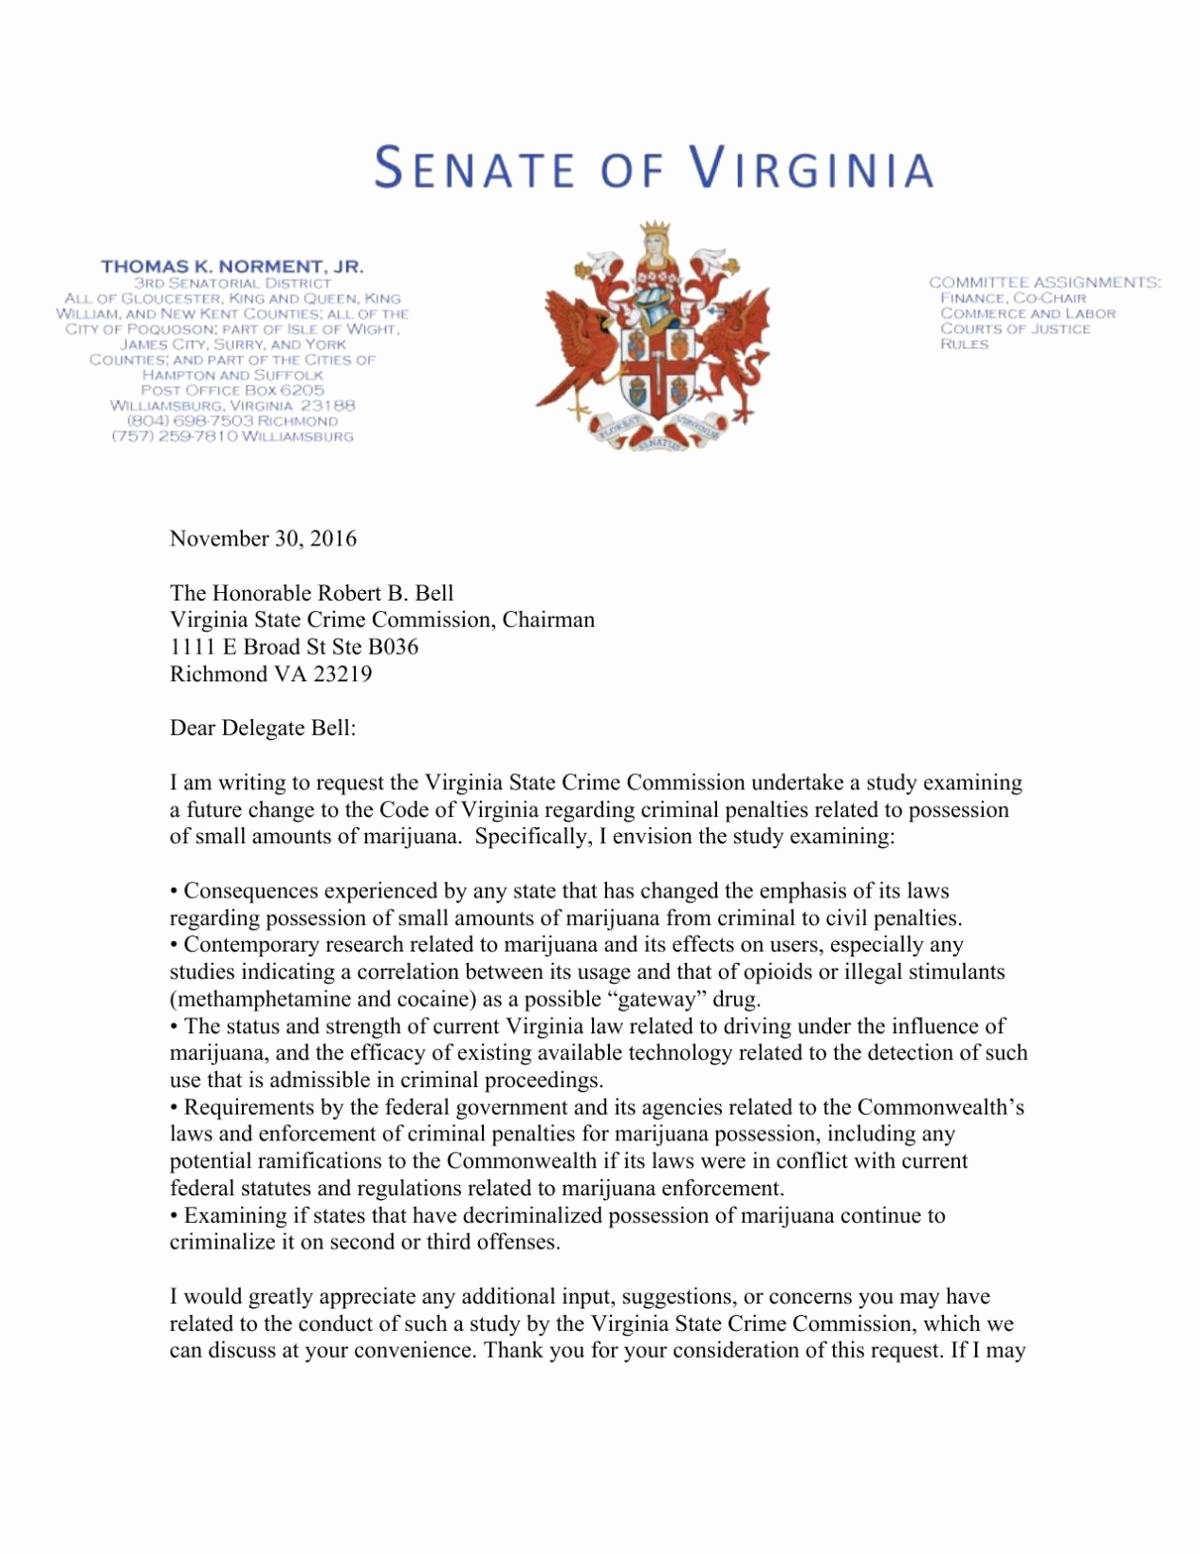 Lox Letter Example Beautiful Virginia Senate Leader formally Requests Study On